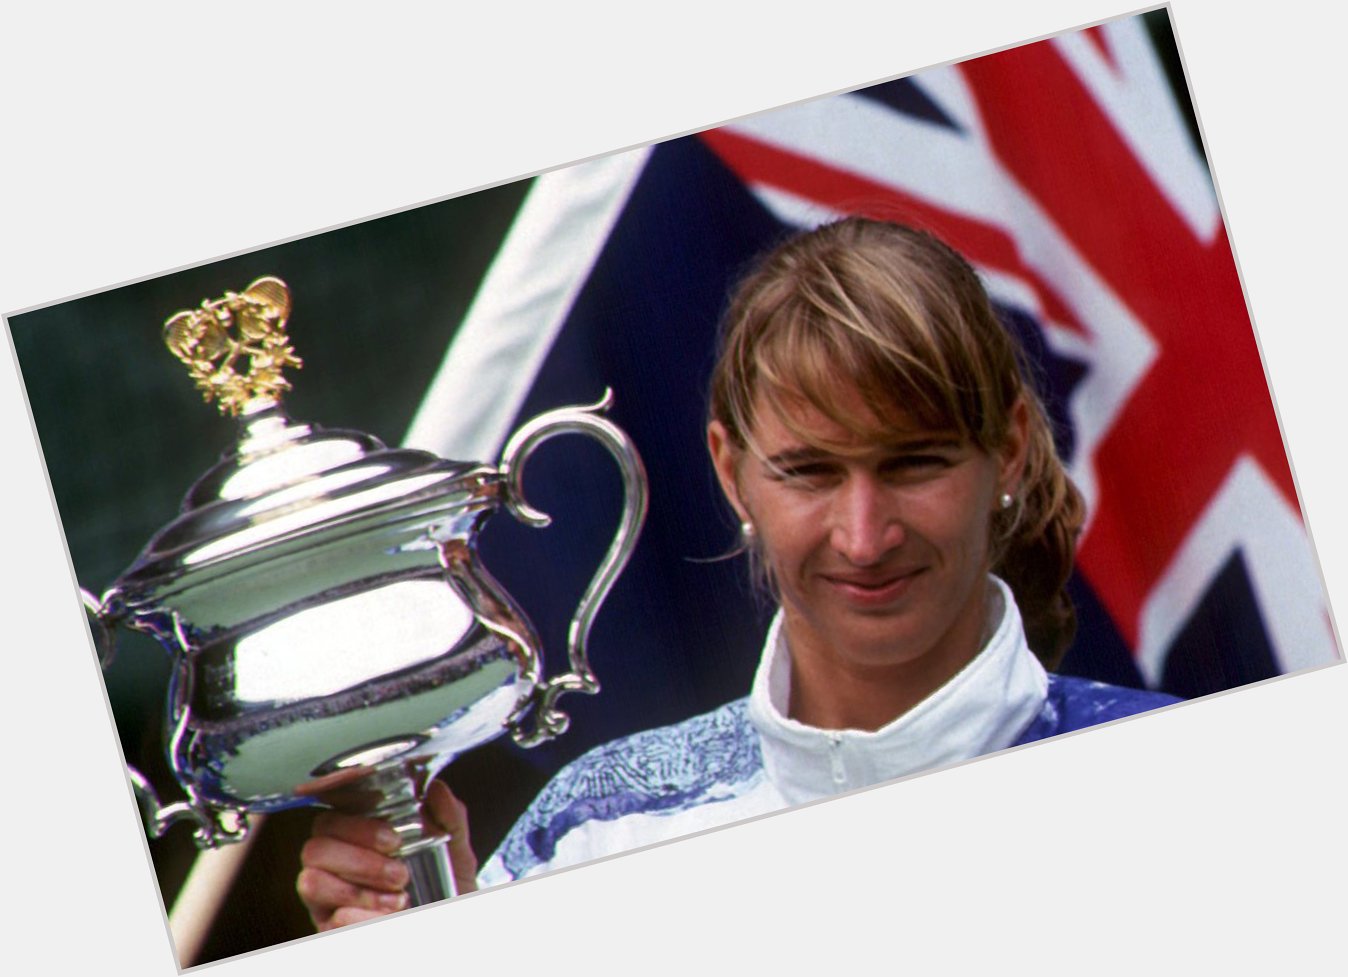 On this day, one of the all-time tennis greats was born. Happy birthday to our 4x champ, Steffi Graf. 